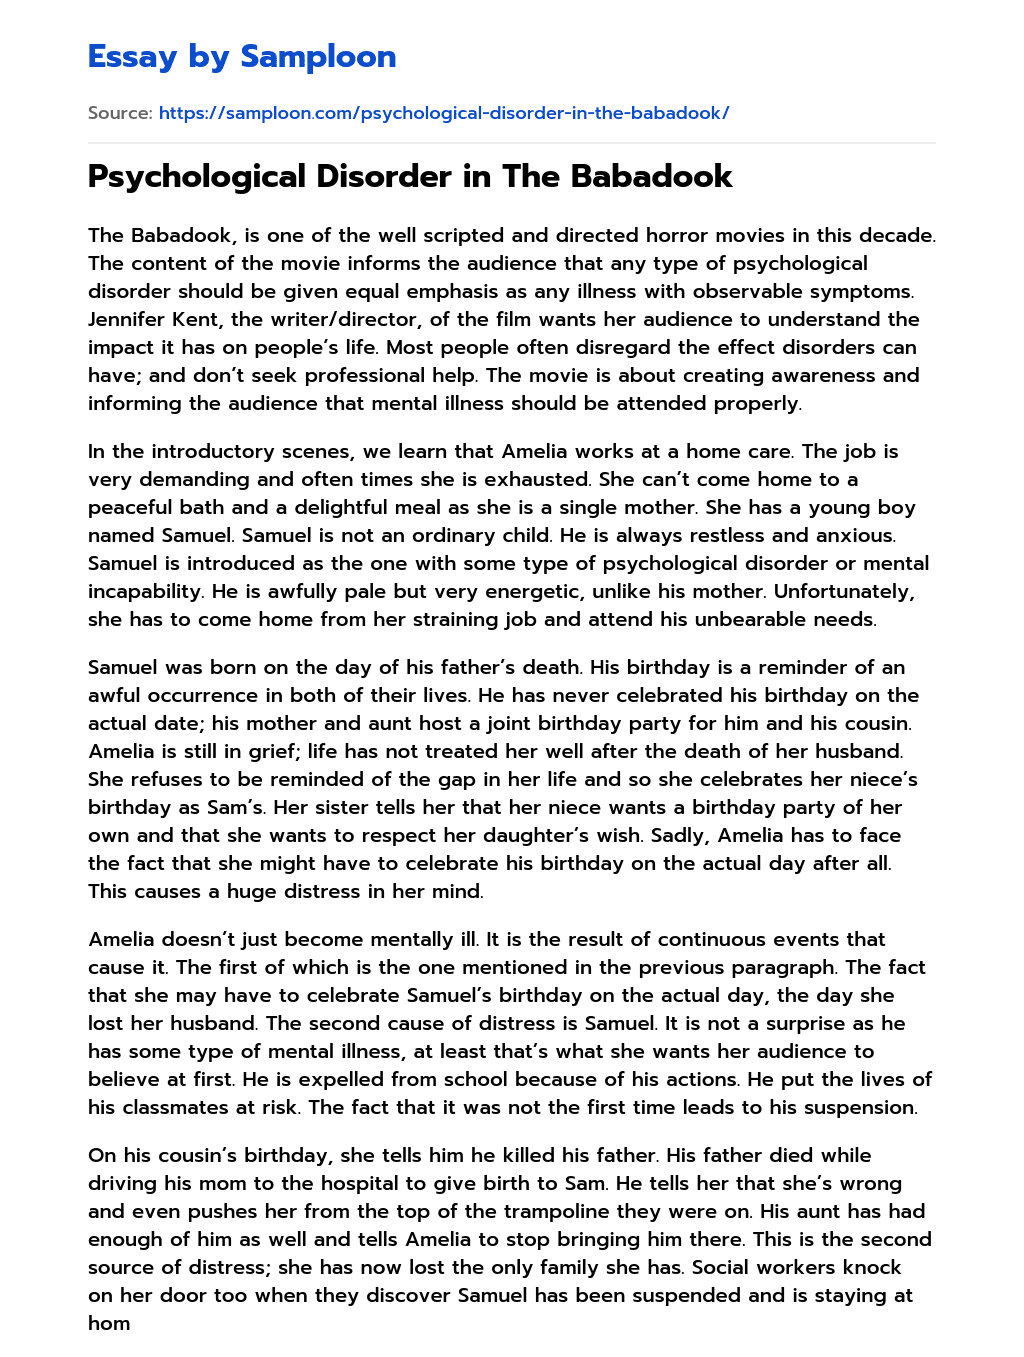 Psychological Disorder in The Babadook essay